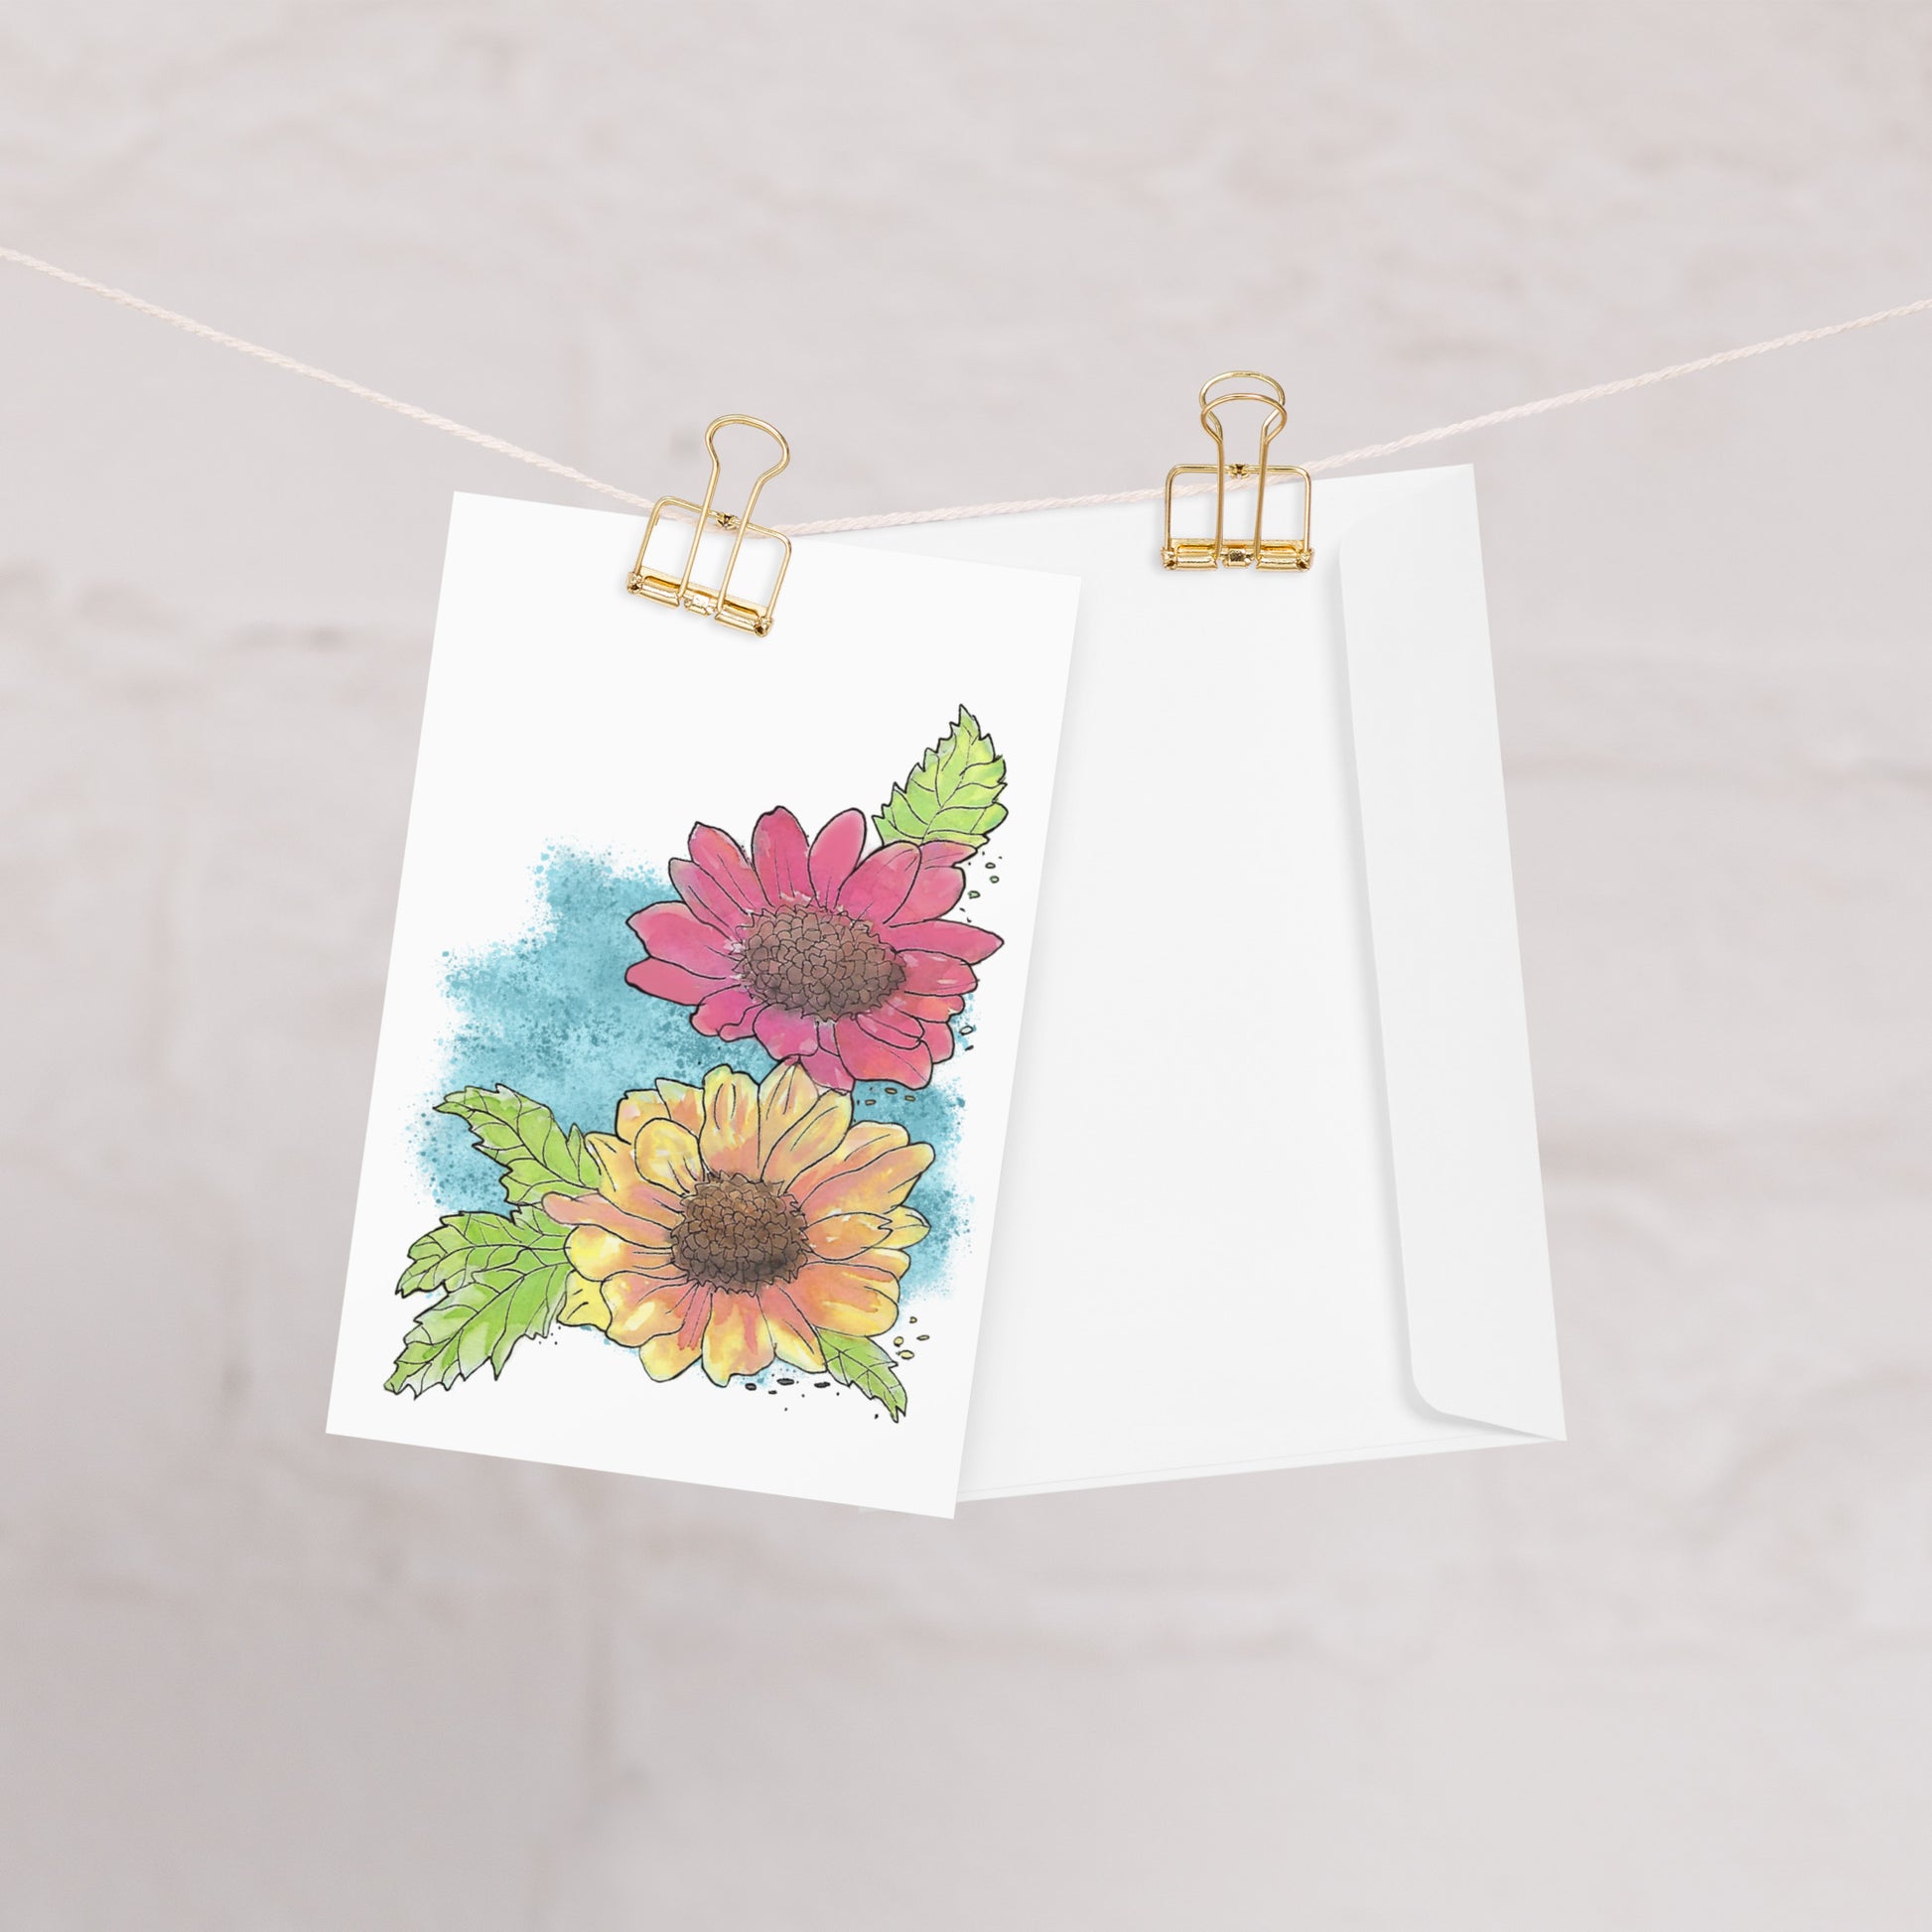 4 by 6 inch watercolor Gerber daisies greeting card and envelope. Has watercolor daisies on the front. The inside has a blue watercolor border with daisy accents and room for a message. Card and envelope shown hanging from clips on a string.